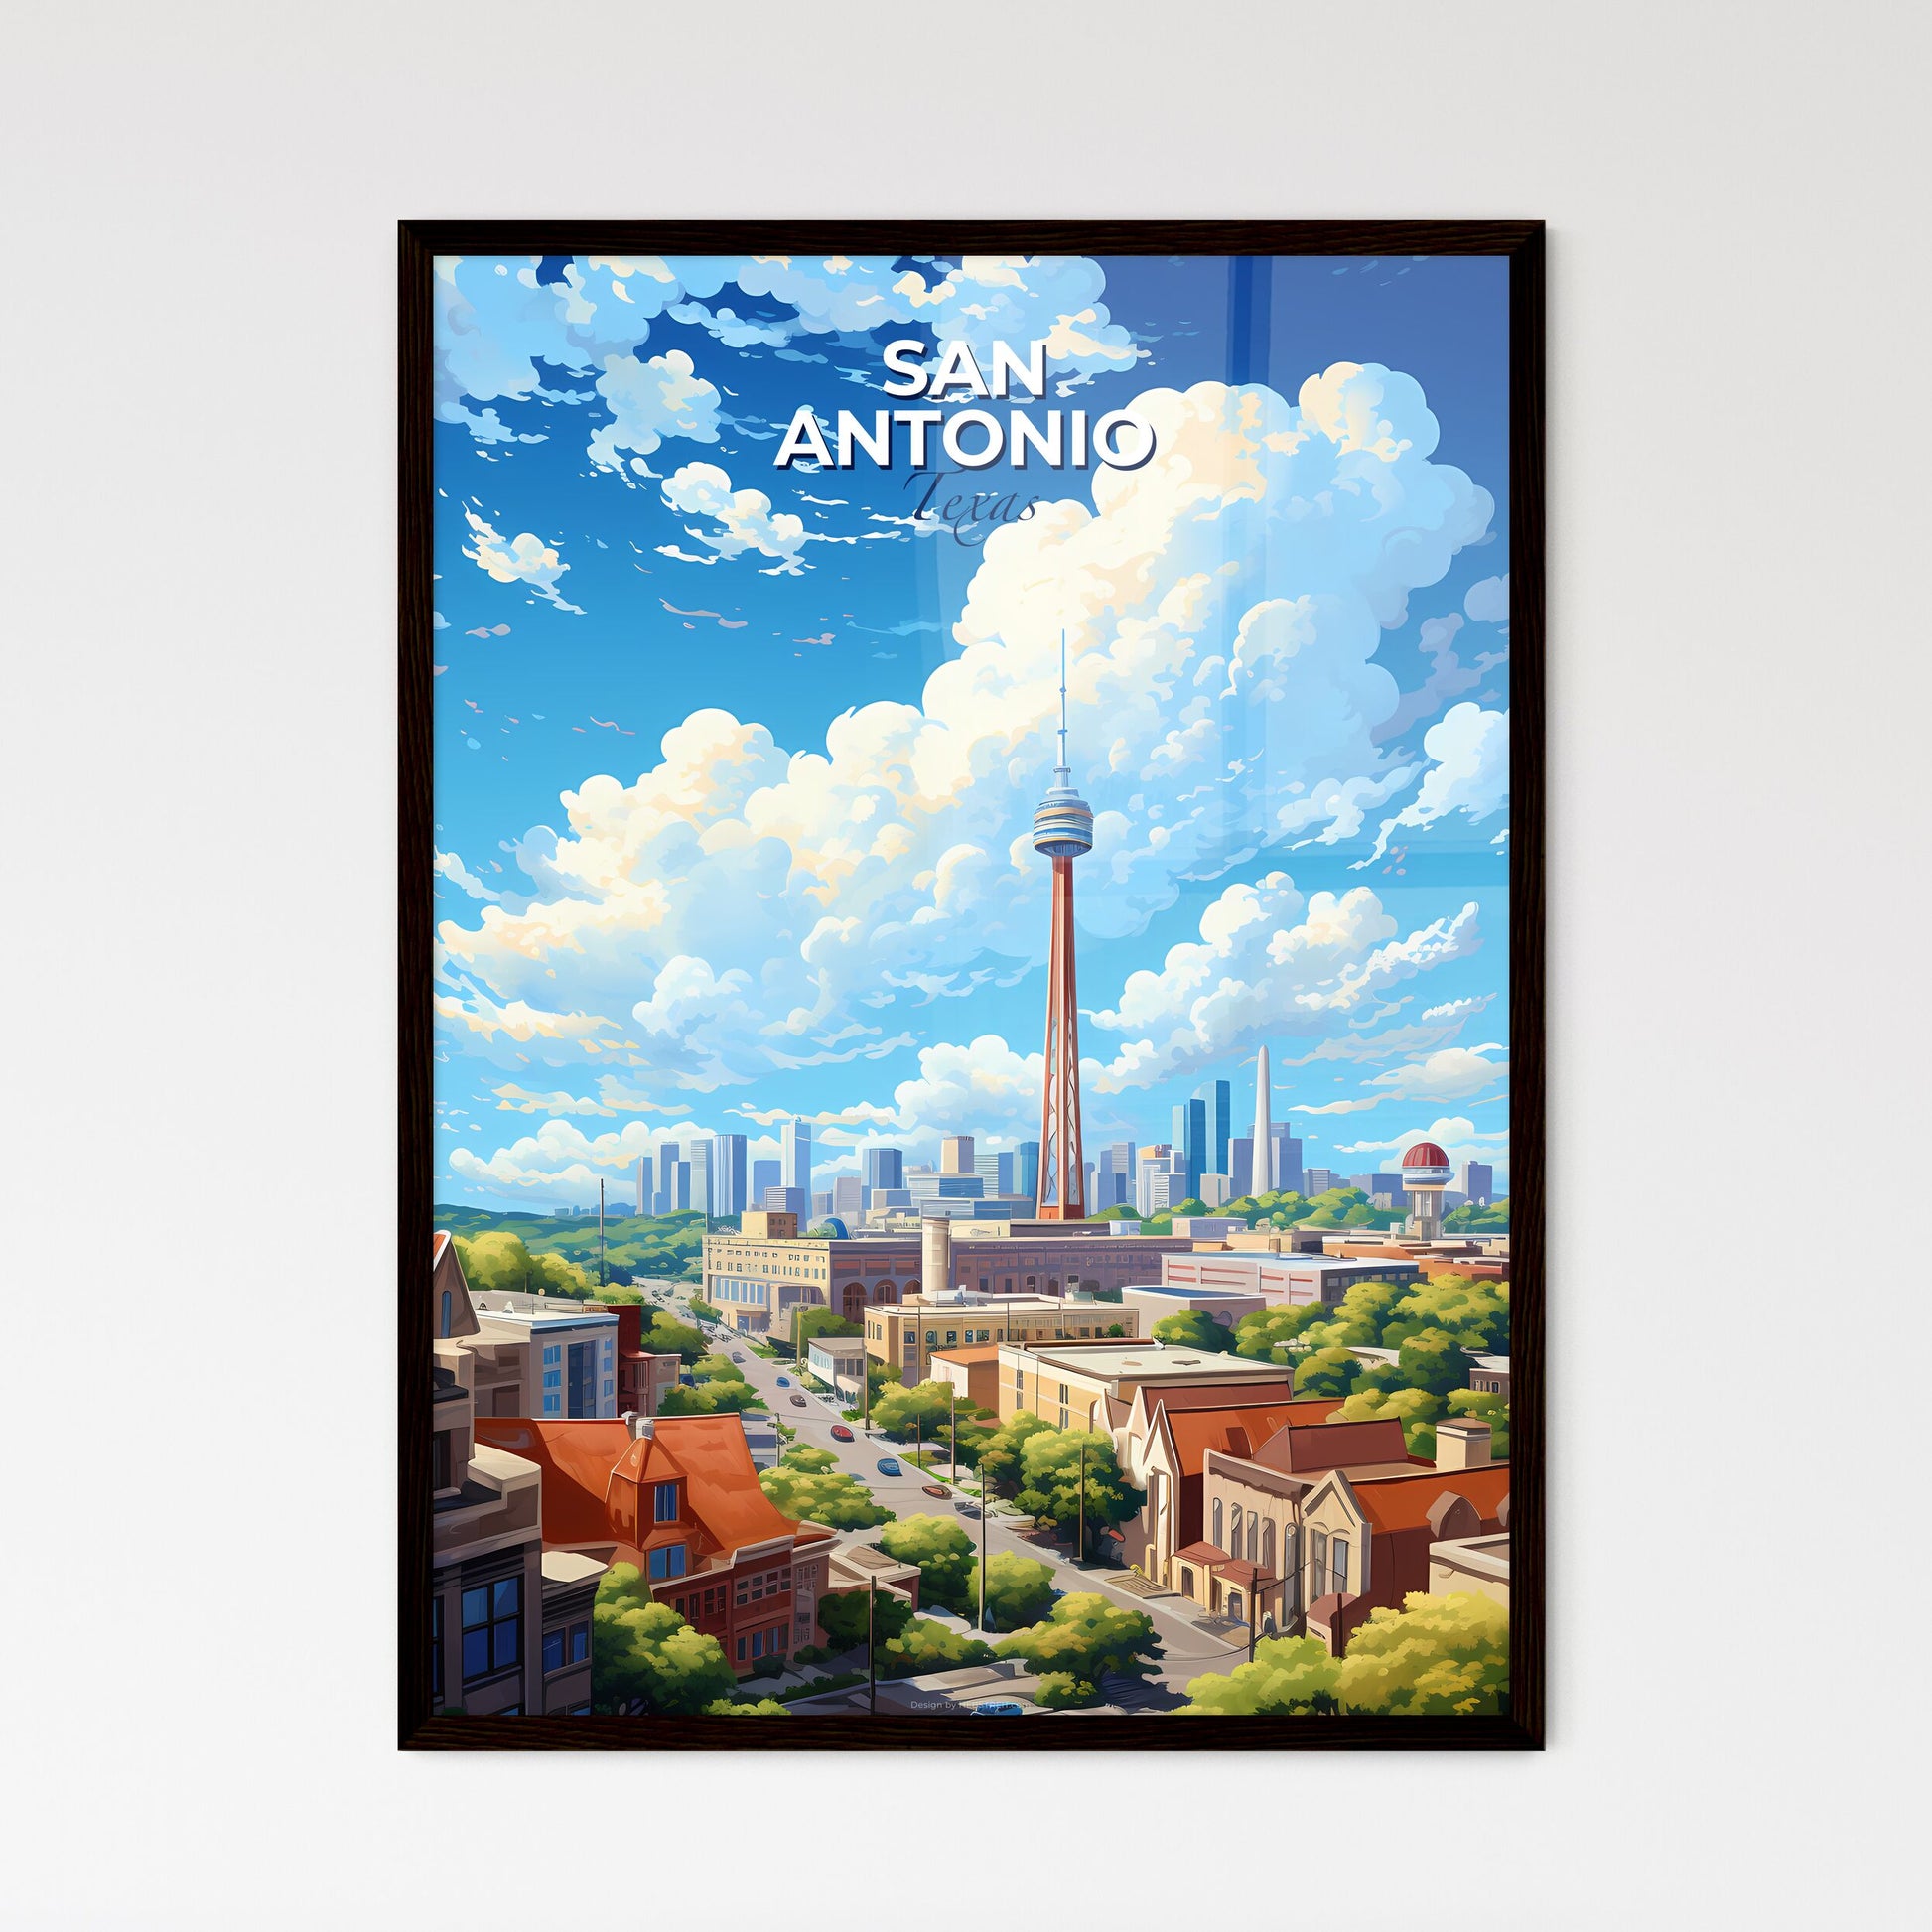 San Antonio Texas Skyline - A City With A Tower And Buildings - Customizable Travel Gift Default Title